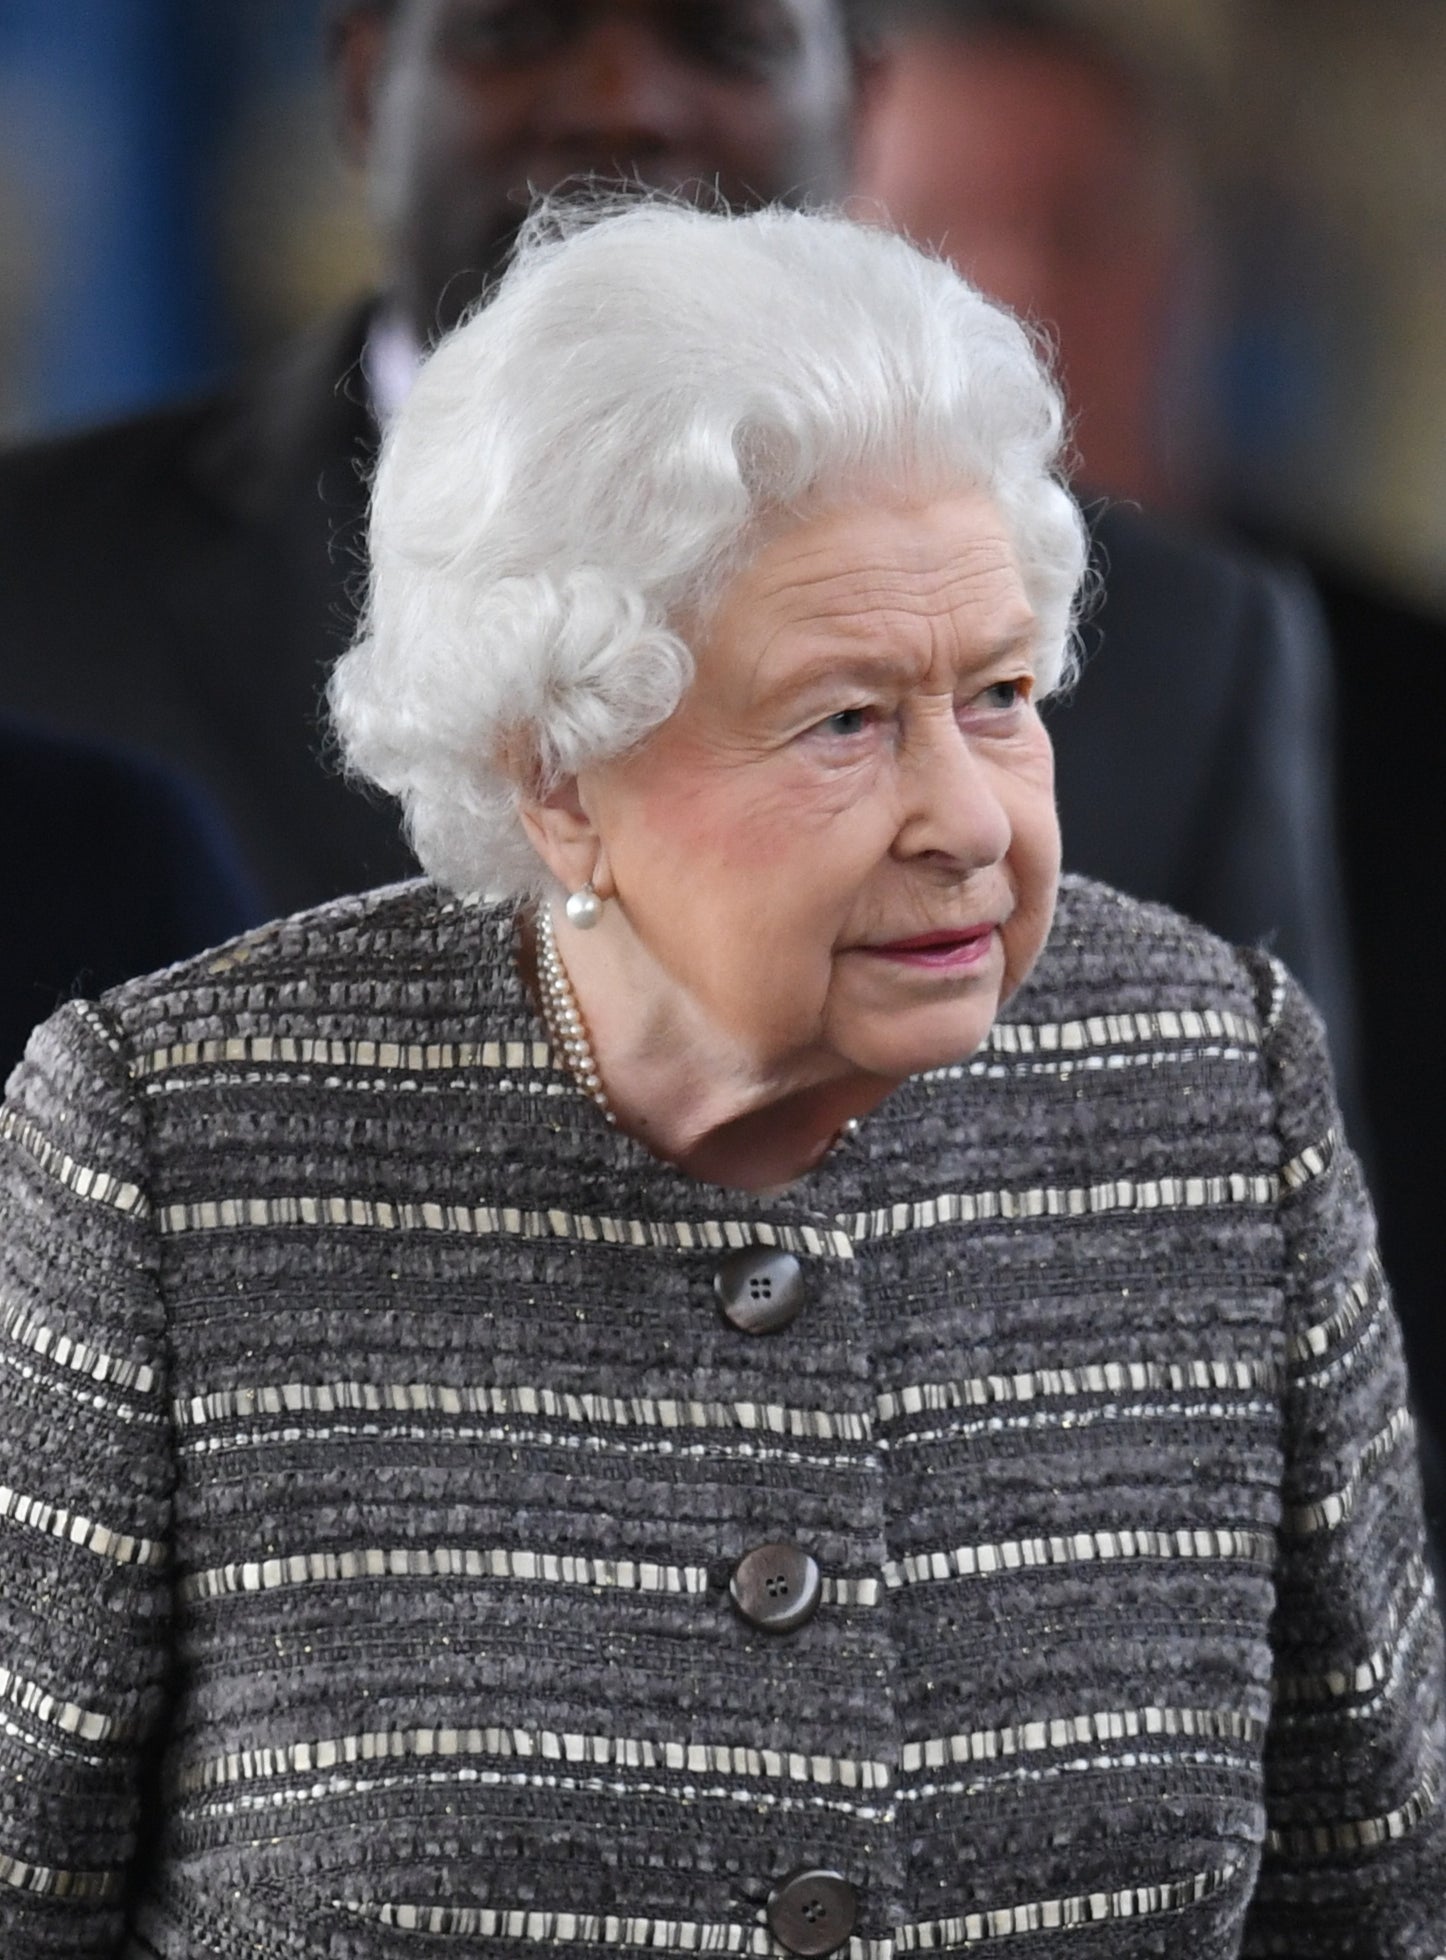 Police said the order would enhance security at the Queen’s Windsor residence (Joe Giddens/PA)